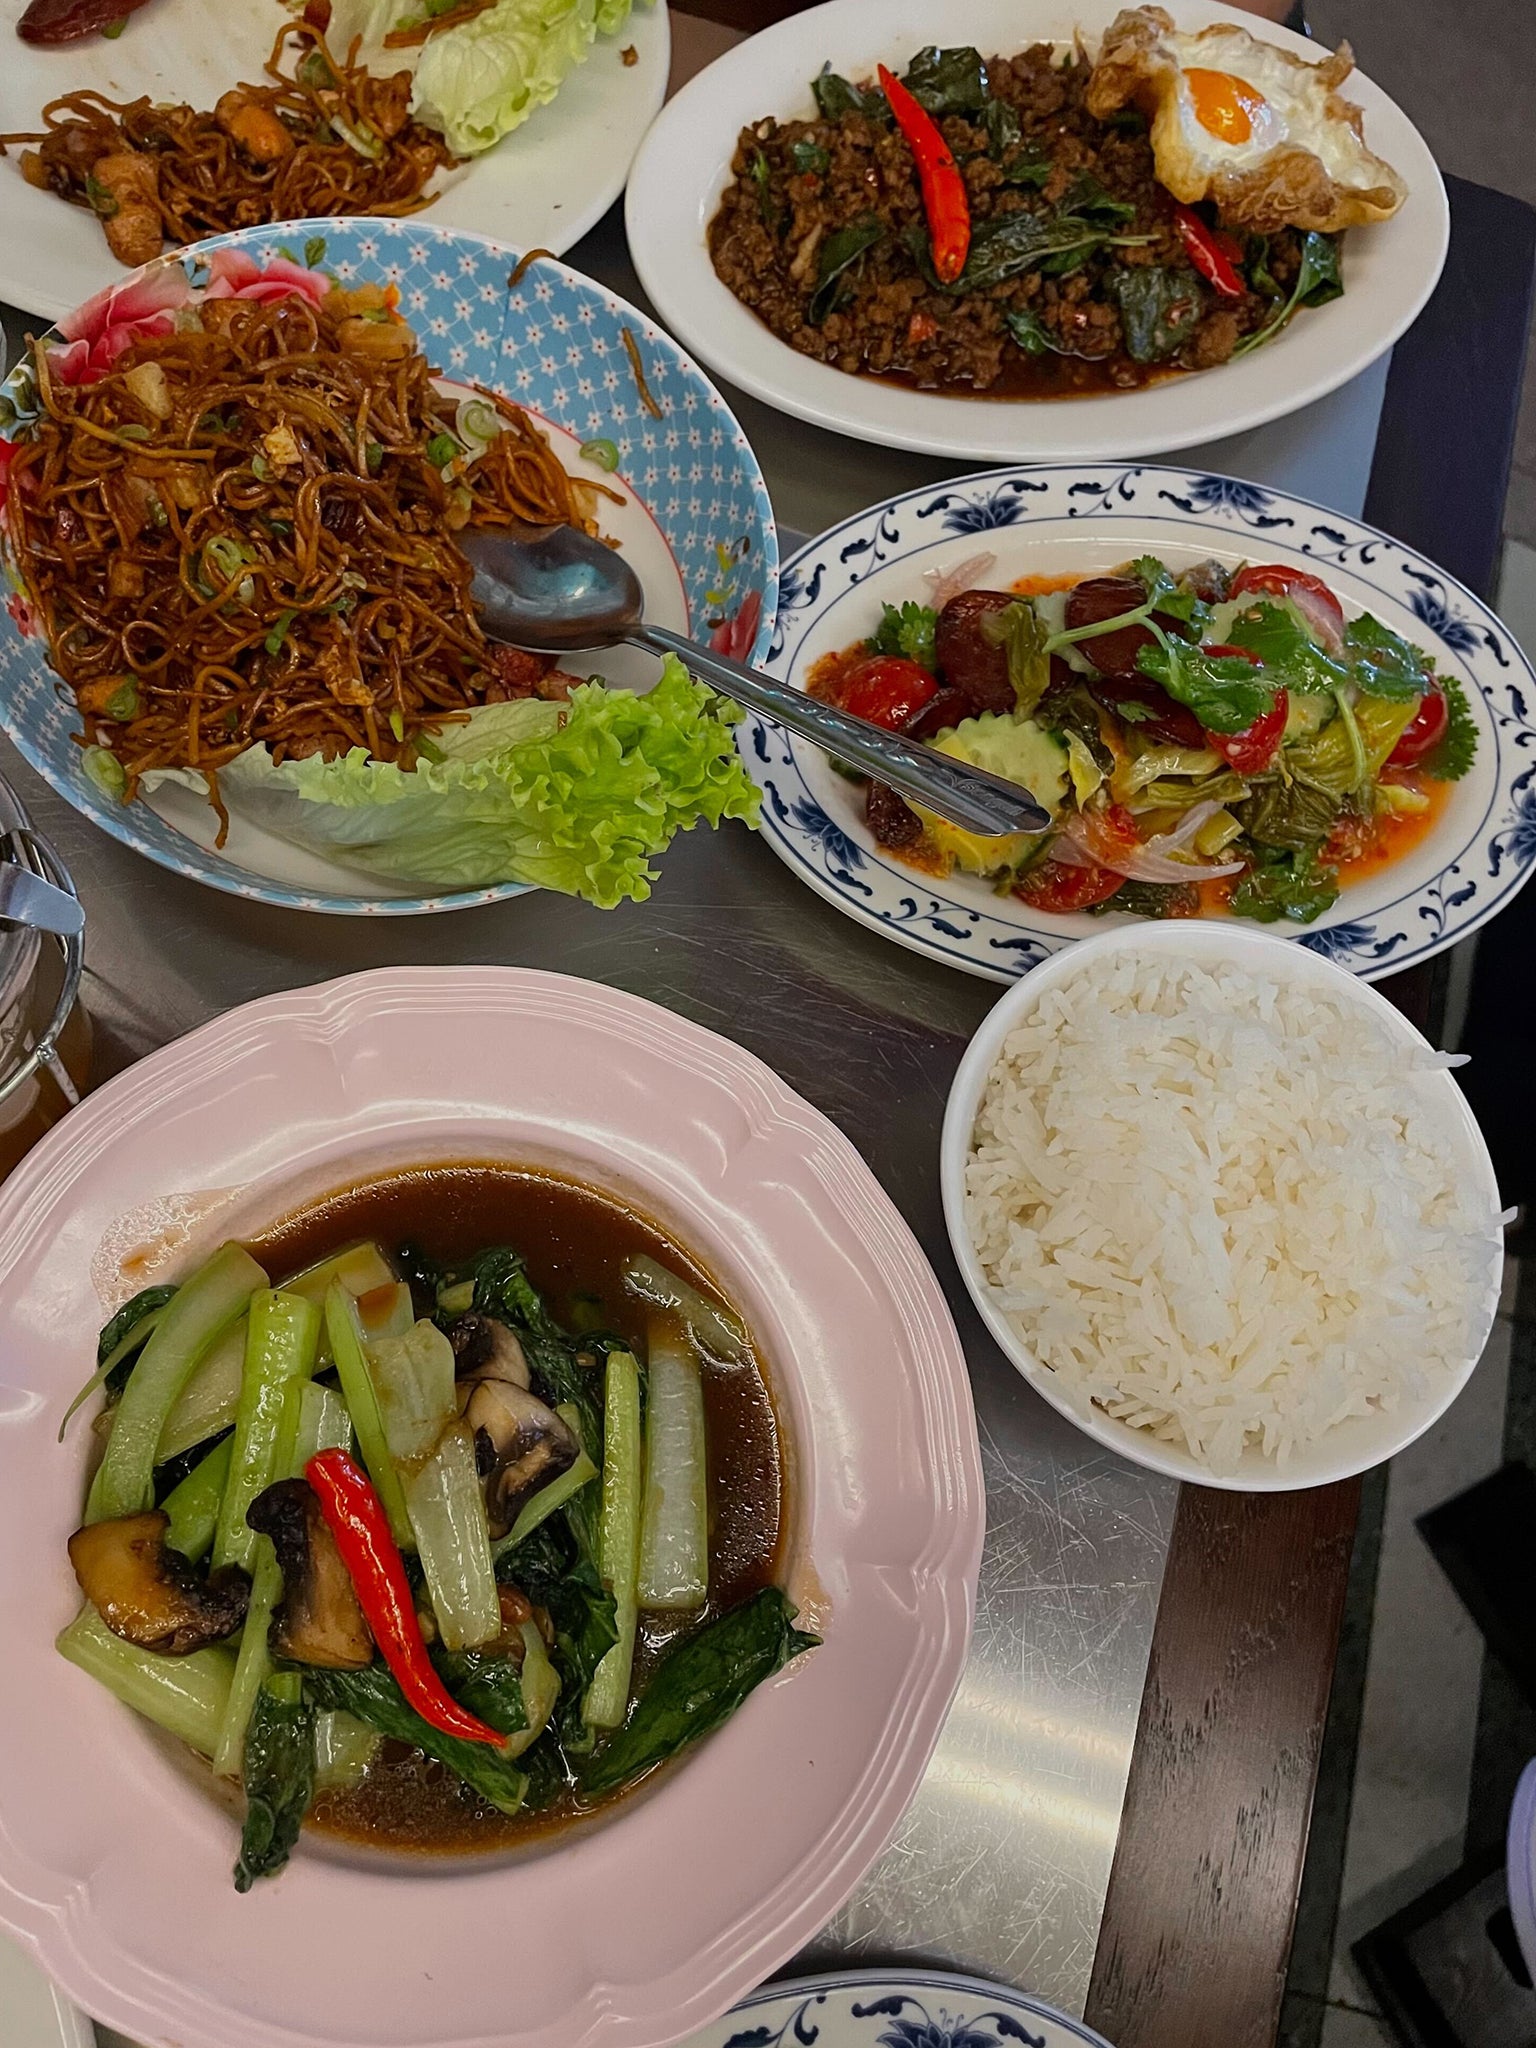 Clockwise from top right: pad krapow, pickled mustard greens and Chinese sausage, steamed vegetables in soy bean sauce, and chicken noodles in red roast pork sauce